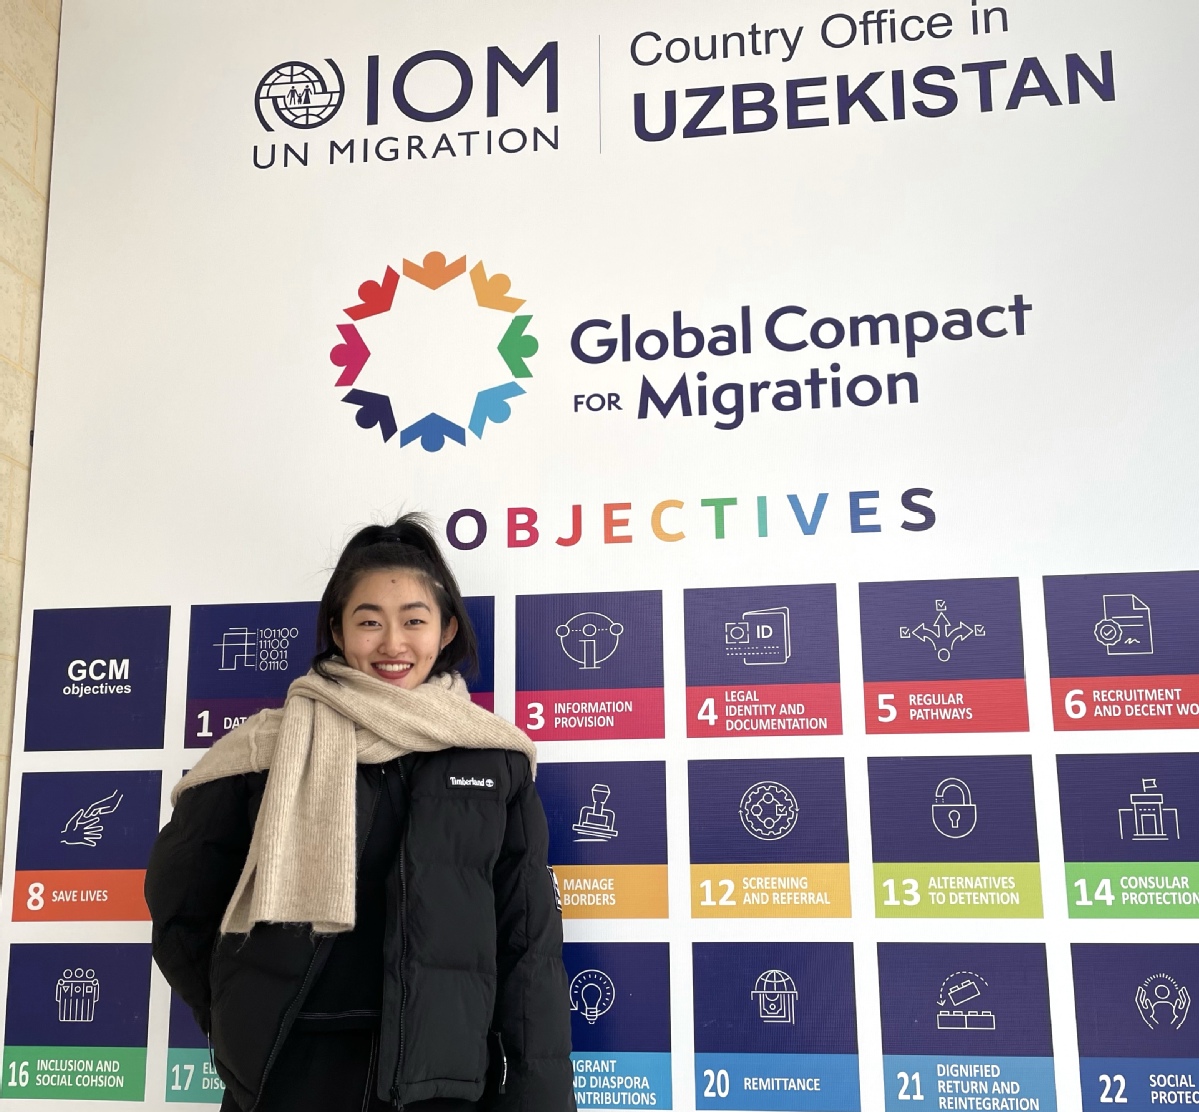 Ma Zhenhua works as a volunteer at the International Organization for Migration in Uzbekistan. CHINA DAILY